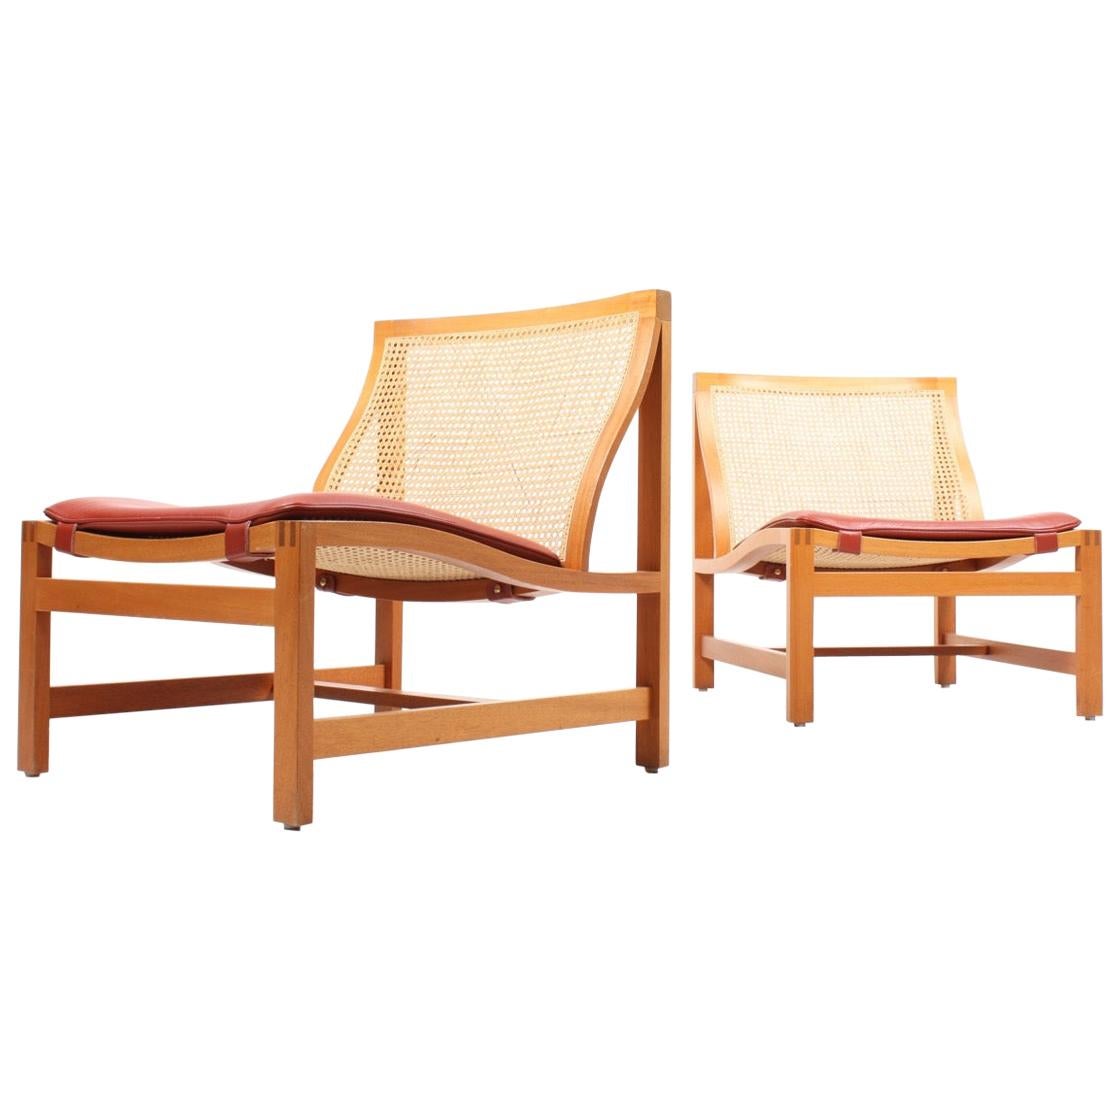 Pair of Midcentury Lounge Chairs by in Beech and Patinated Leather, Danish